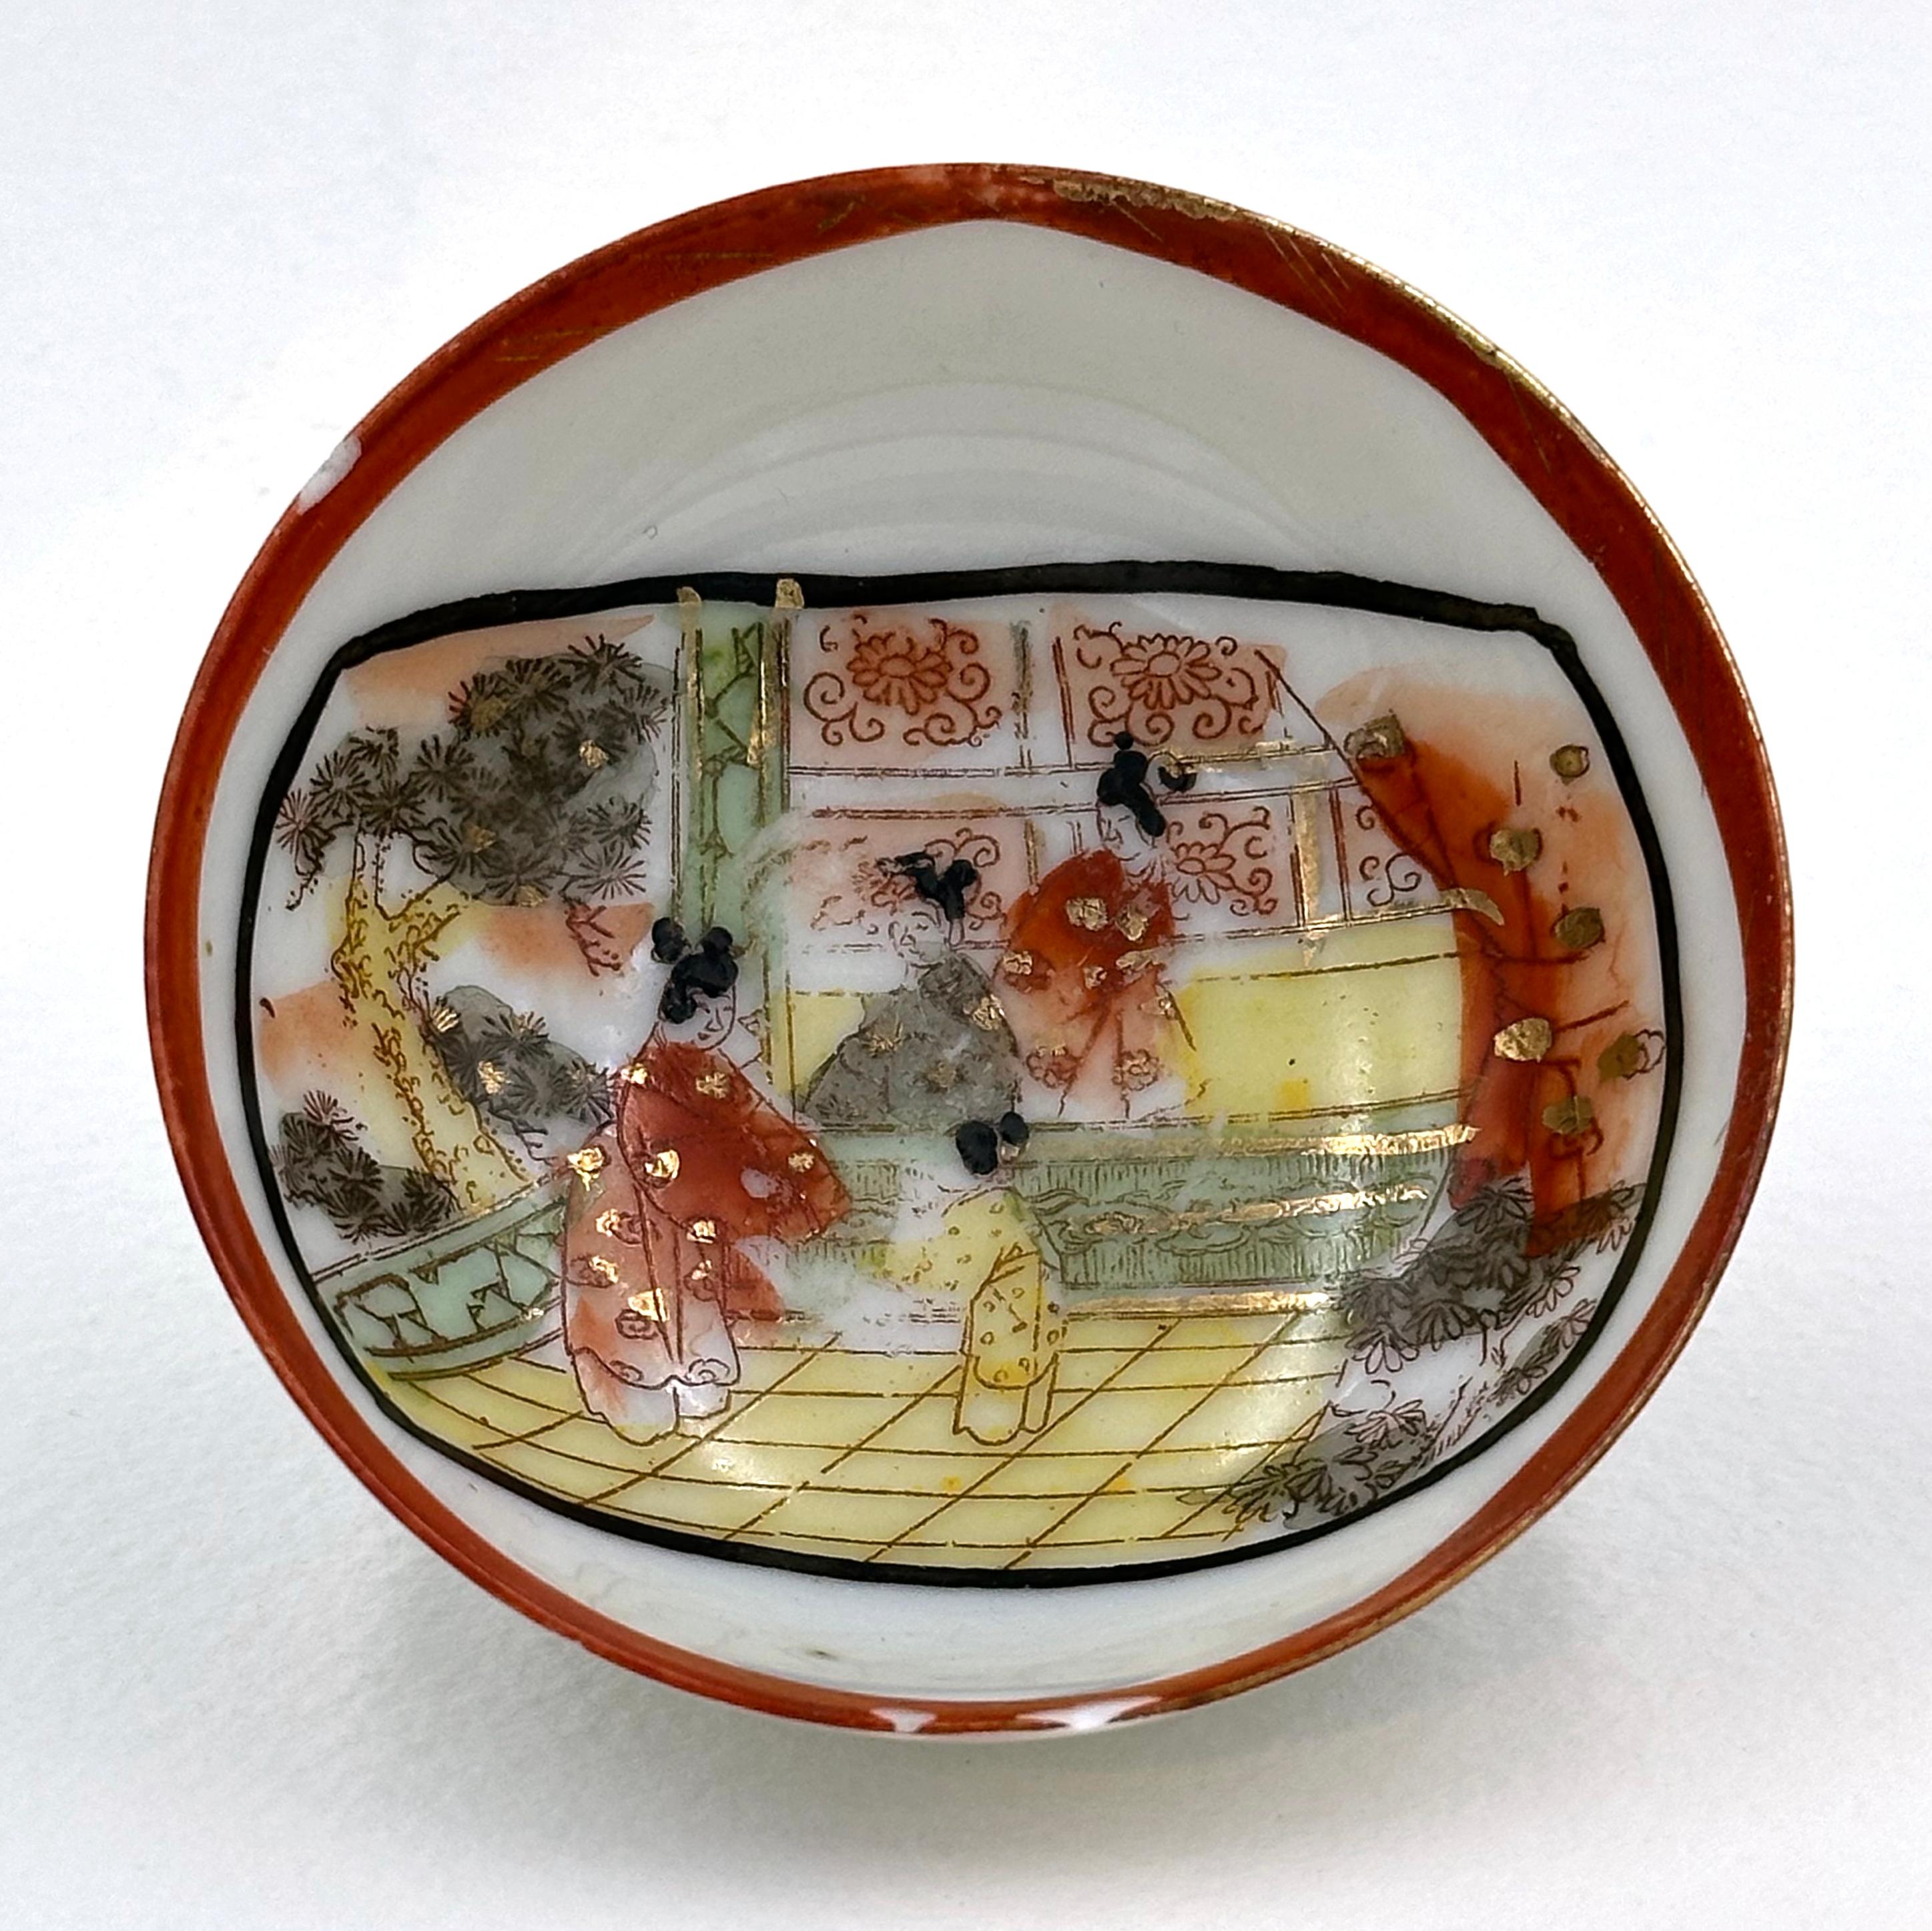 Hand-painted Japanese Sake Bowl - Art by Unknown